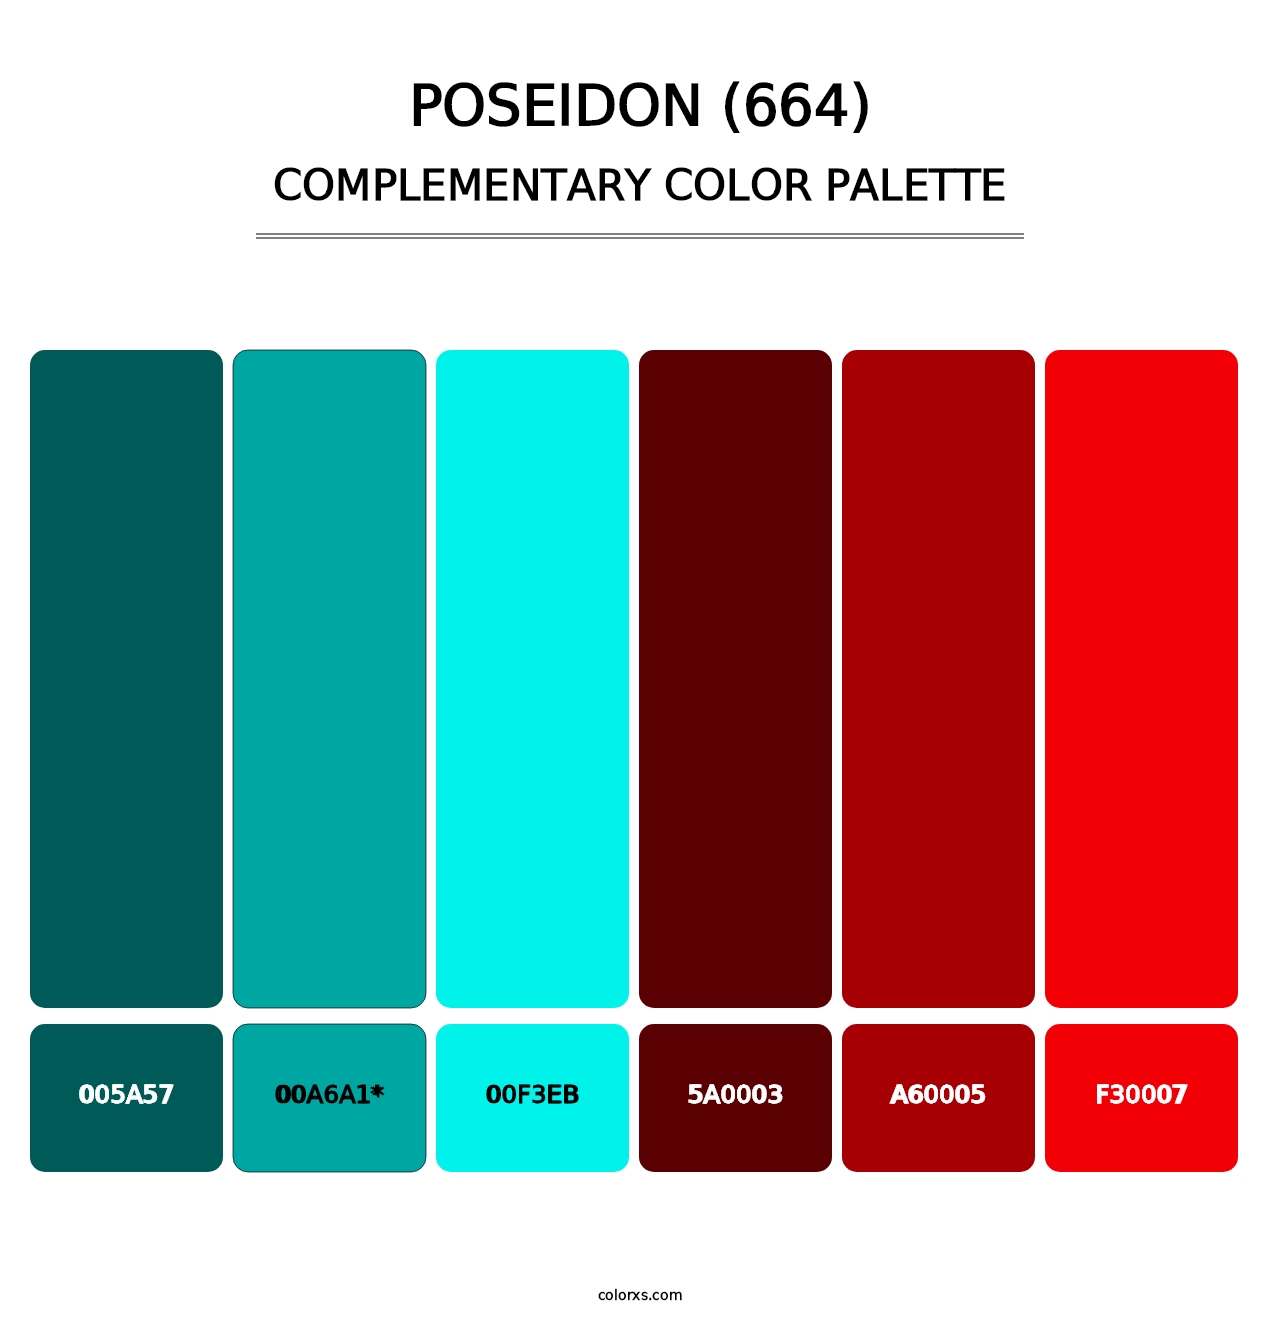 Poseidon (664) - Complementary Color Palette